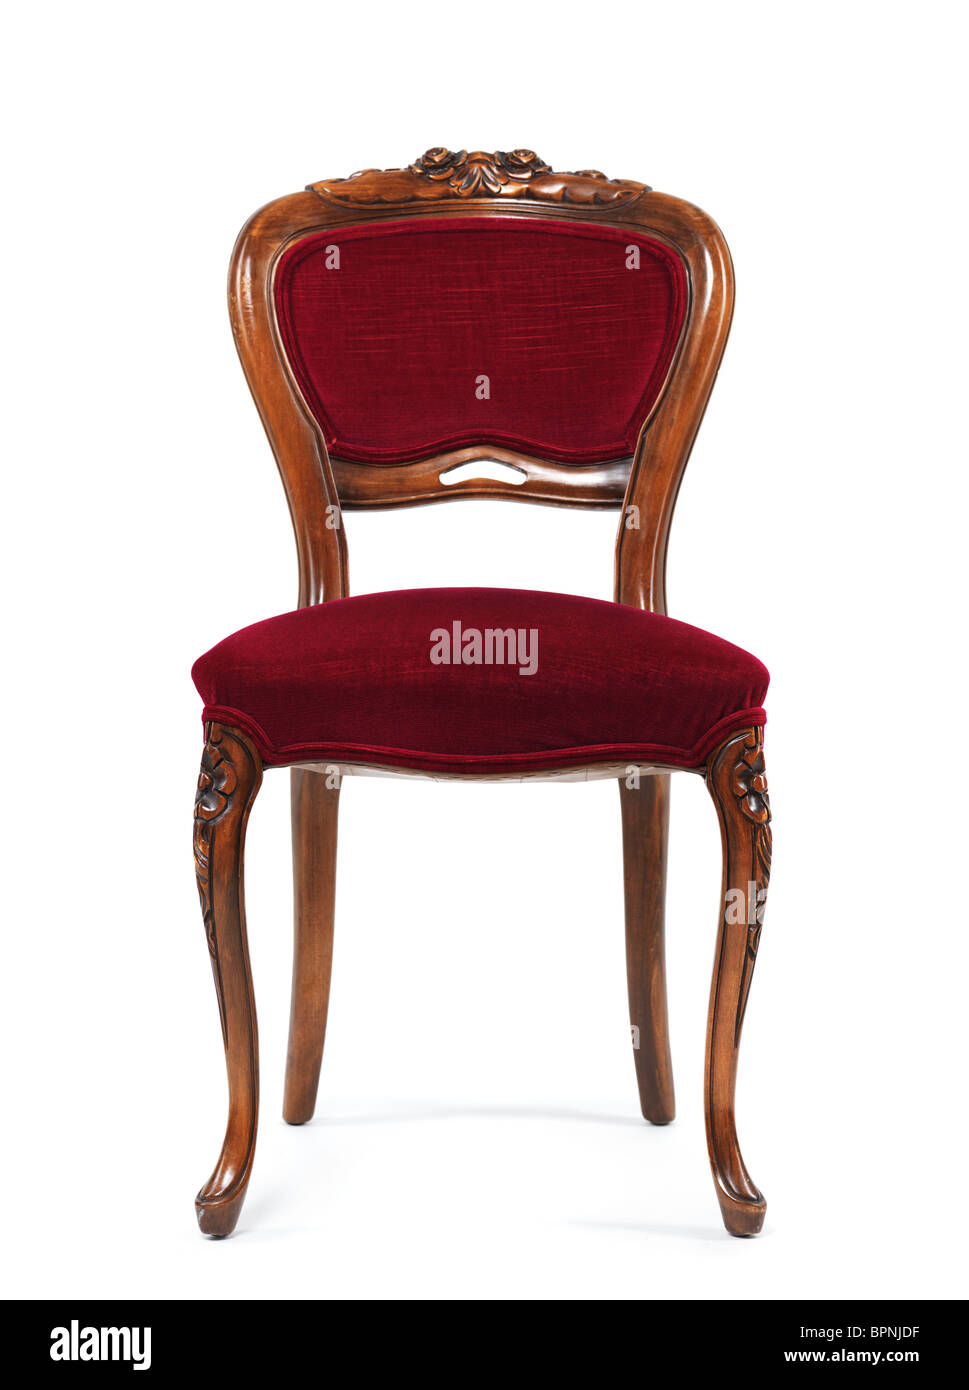 https://c8.alamy.com/comp/BPNJDF/antique-wooden-chair-with-red-upholstery-isolated-on-white-background-BPNJDF.jpg